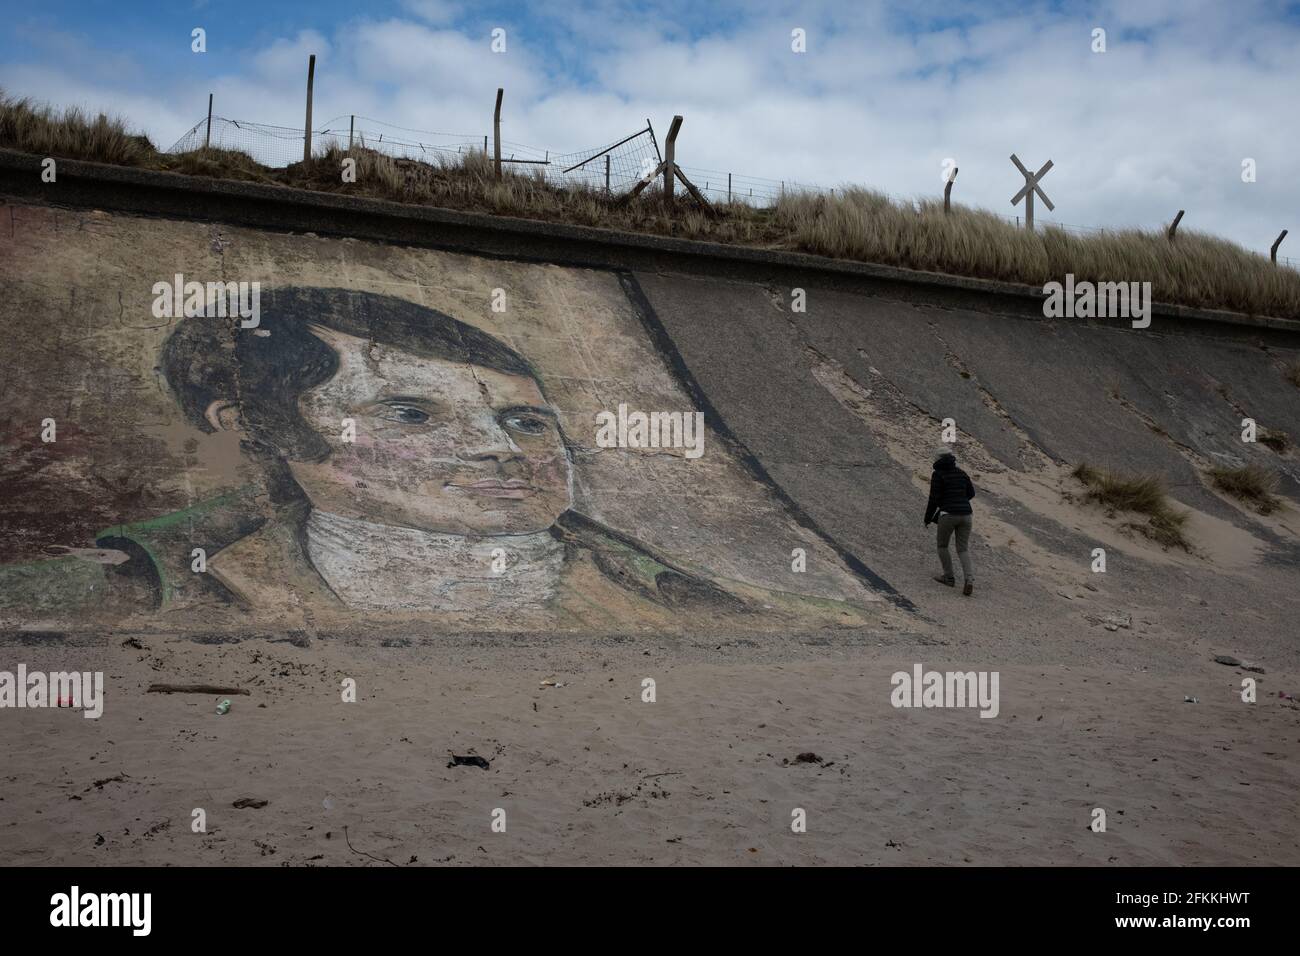 Portrait of Scottish poet Robert Burns, painted on a concrete wall on Ardeer beach, in Ardeer, Scotland, on 2 May 2021. Stock Photo